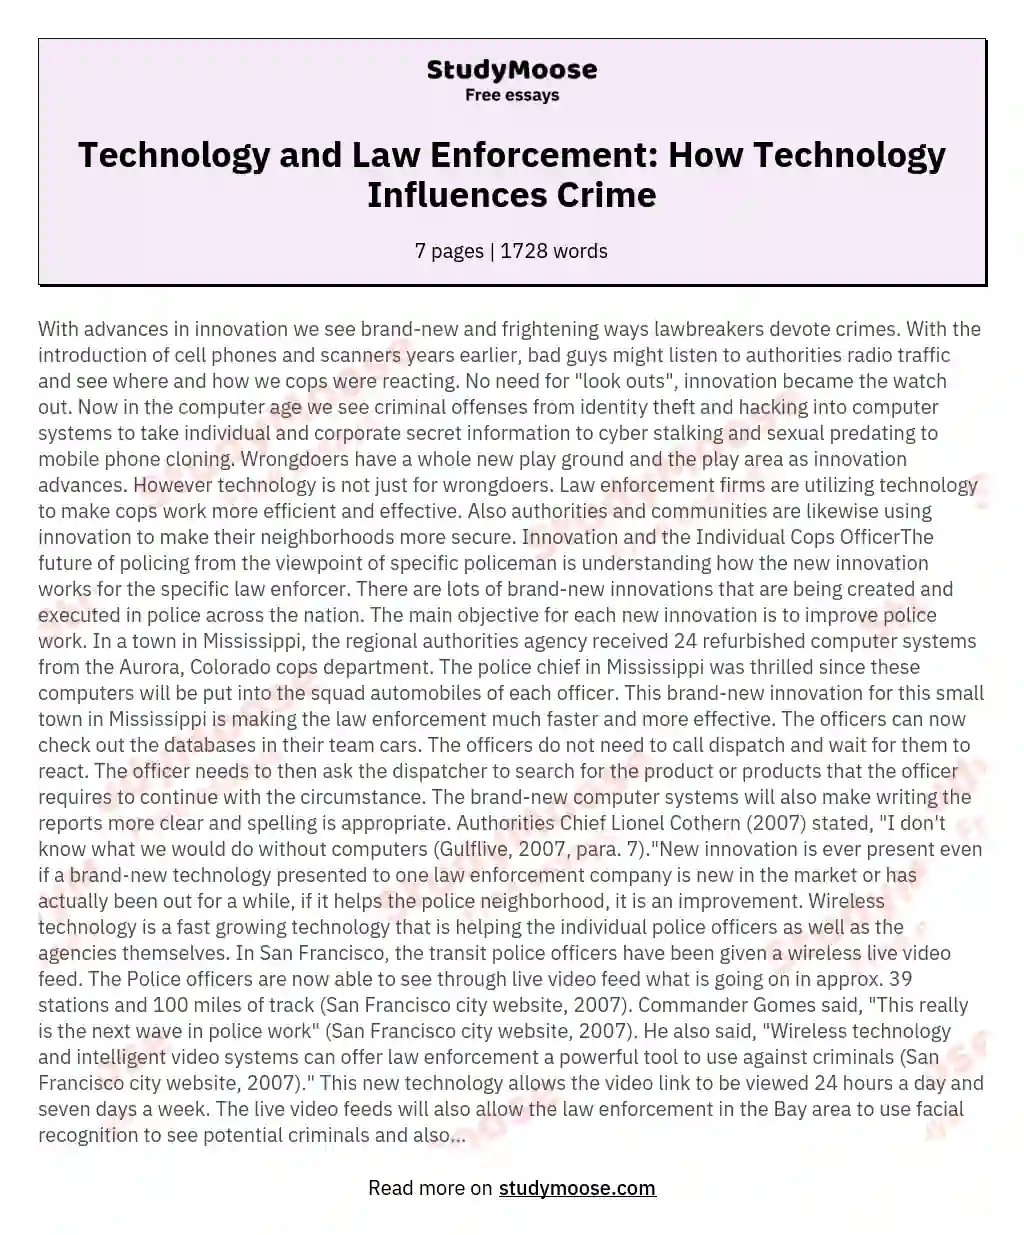 Technology and Law Enforcement: How Technology Influences Crime